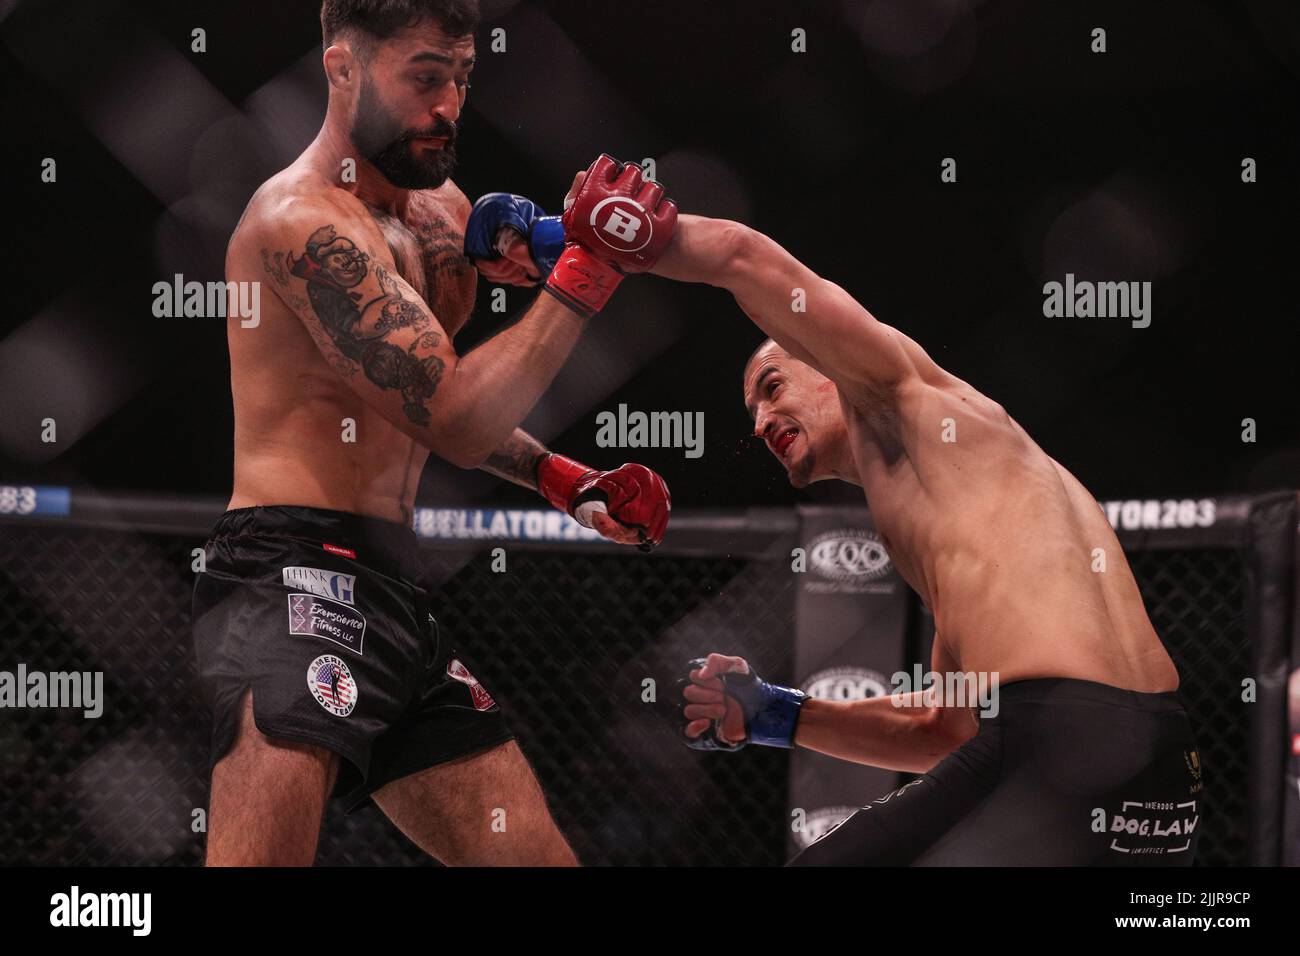 Luis Iniguez throws an overhand left against Roman Faraldo at Bellator 283. Roman Faraldo wins by knock out in the first round from the Emerald Queen Stock Photo